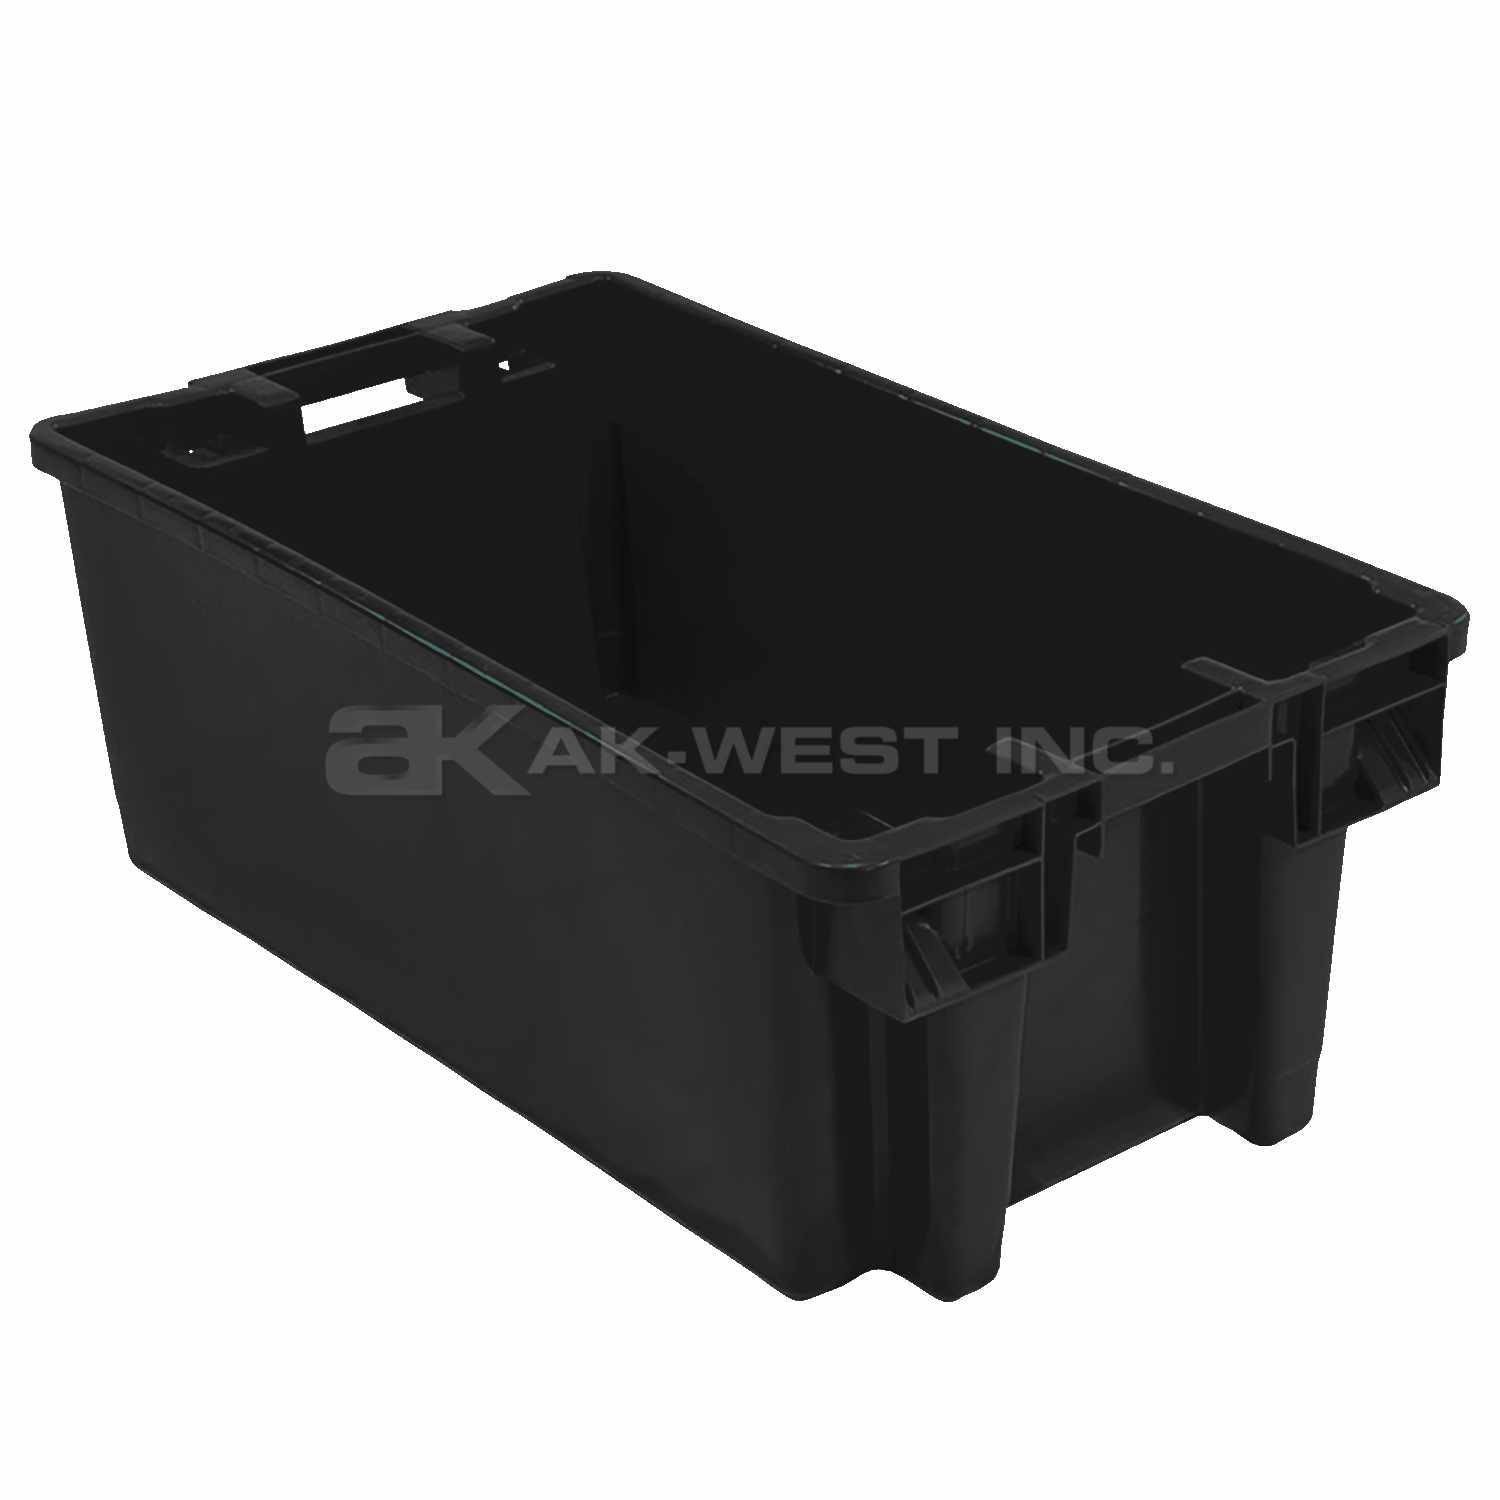 Black, 31" x 18" x 12", Heavy Duty Stack and Nest Container